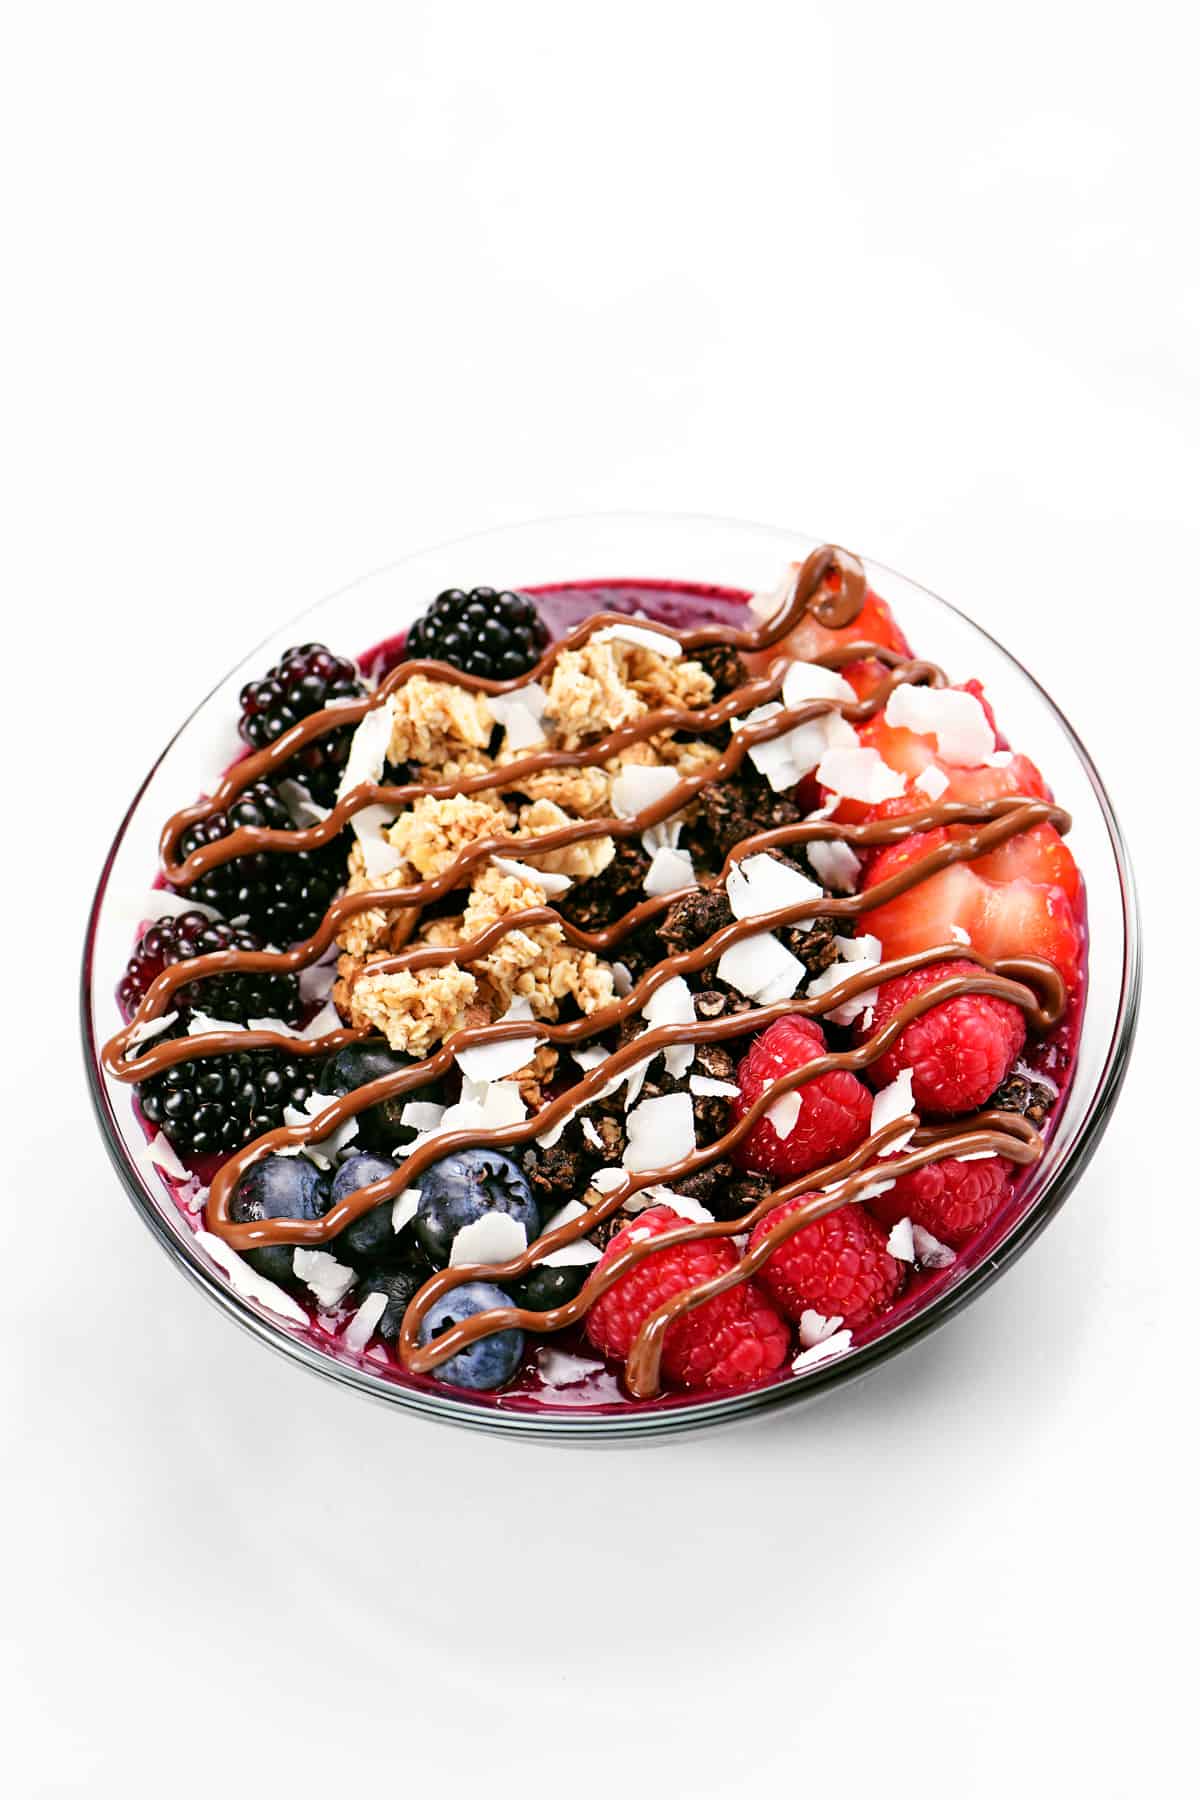 berries and granola with a chocolate topping.